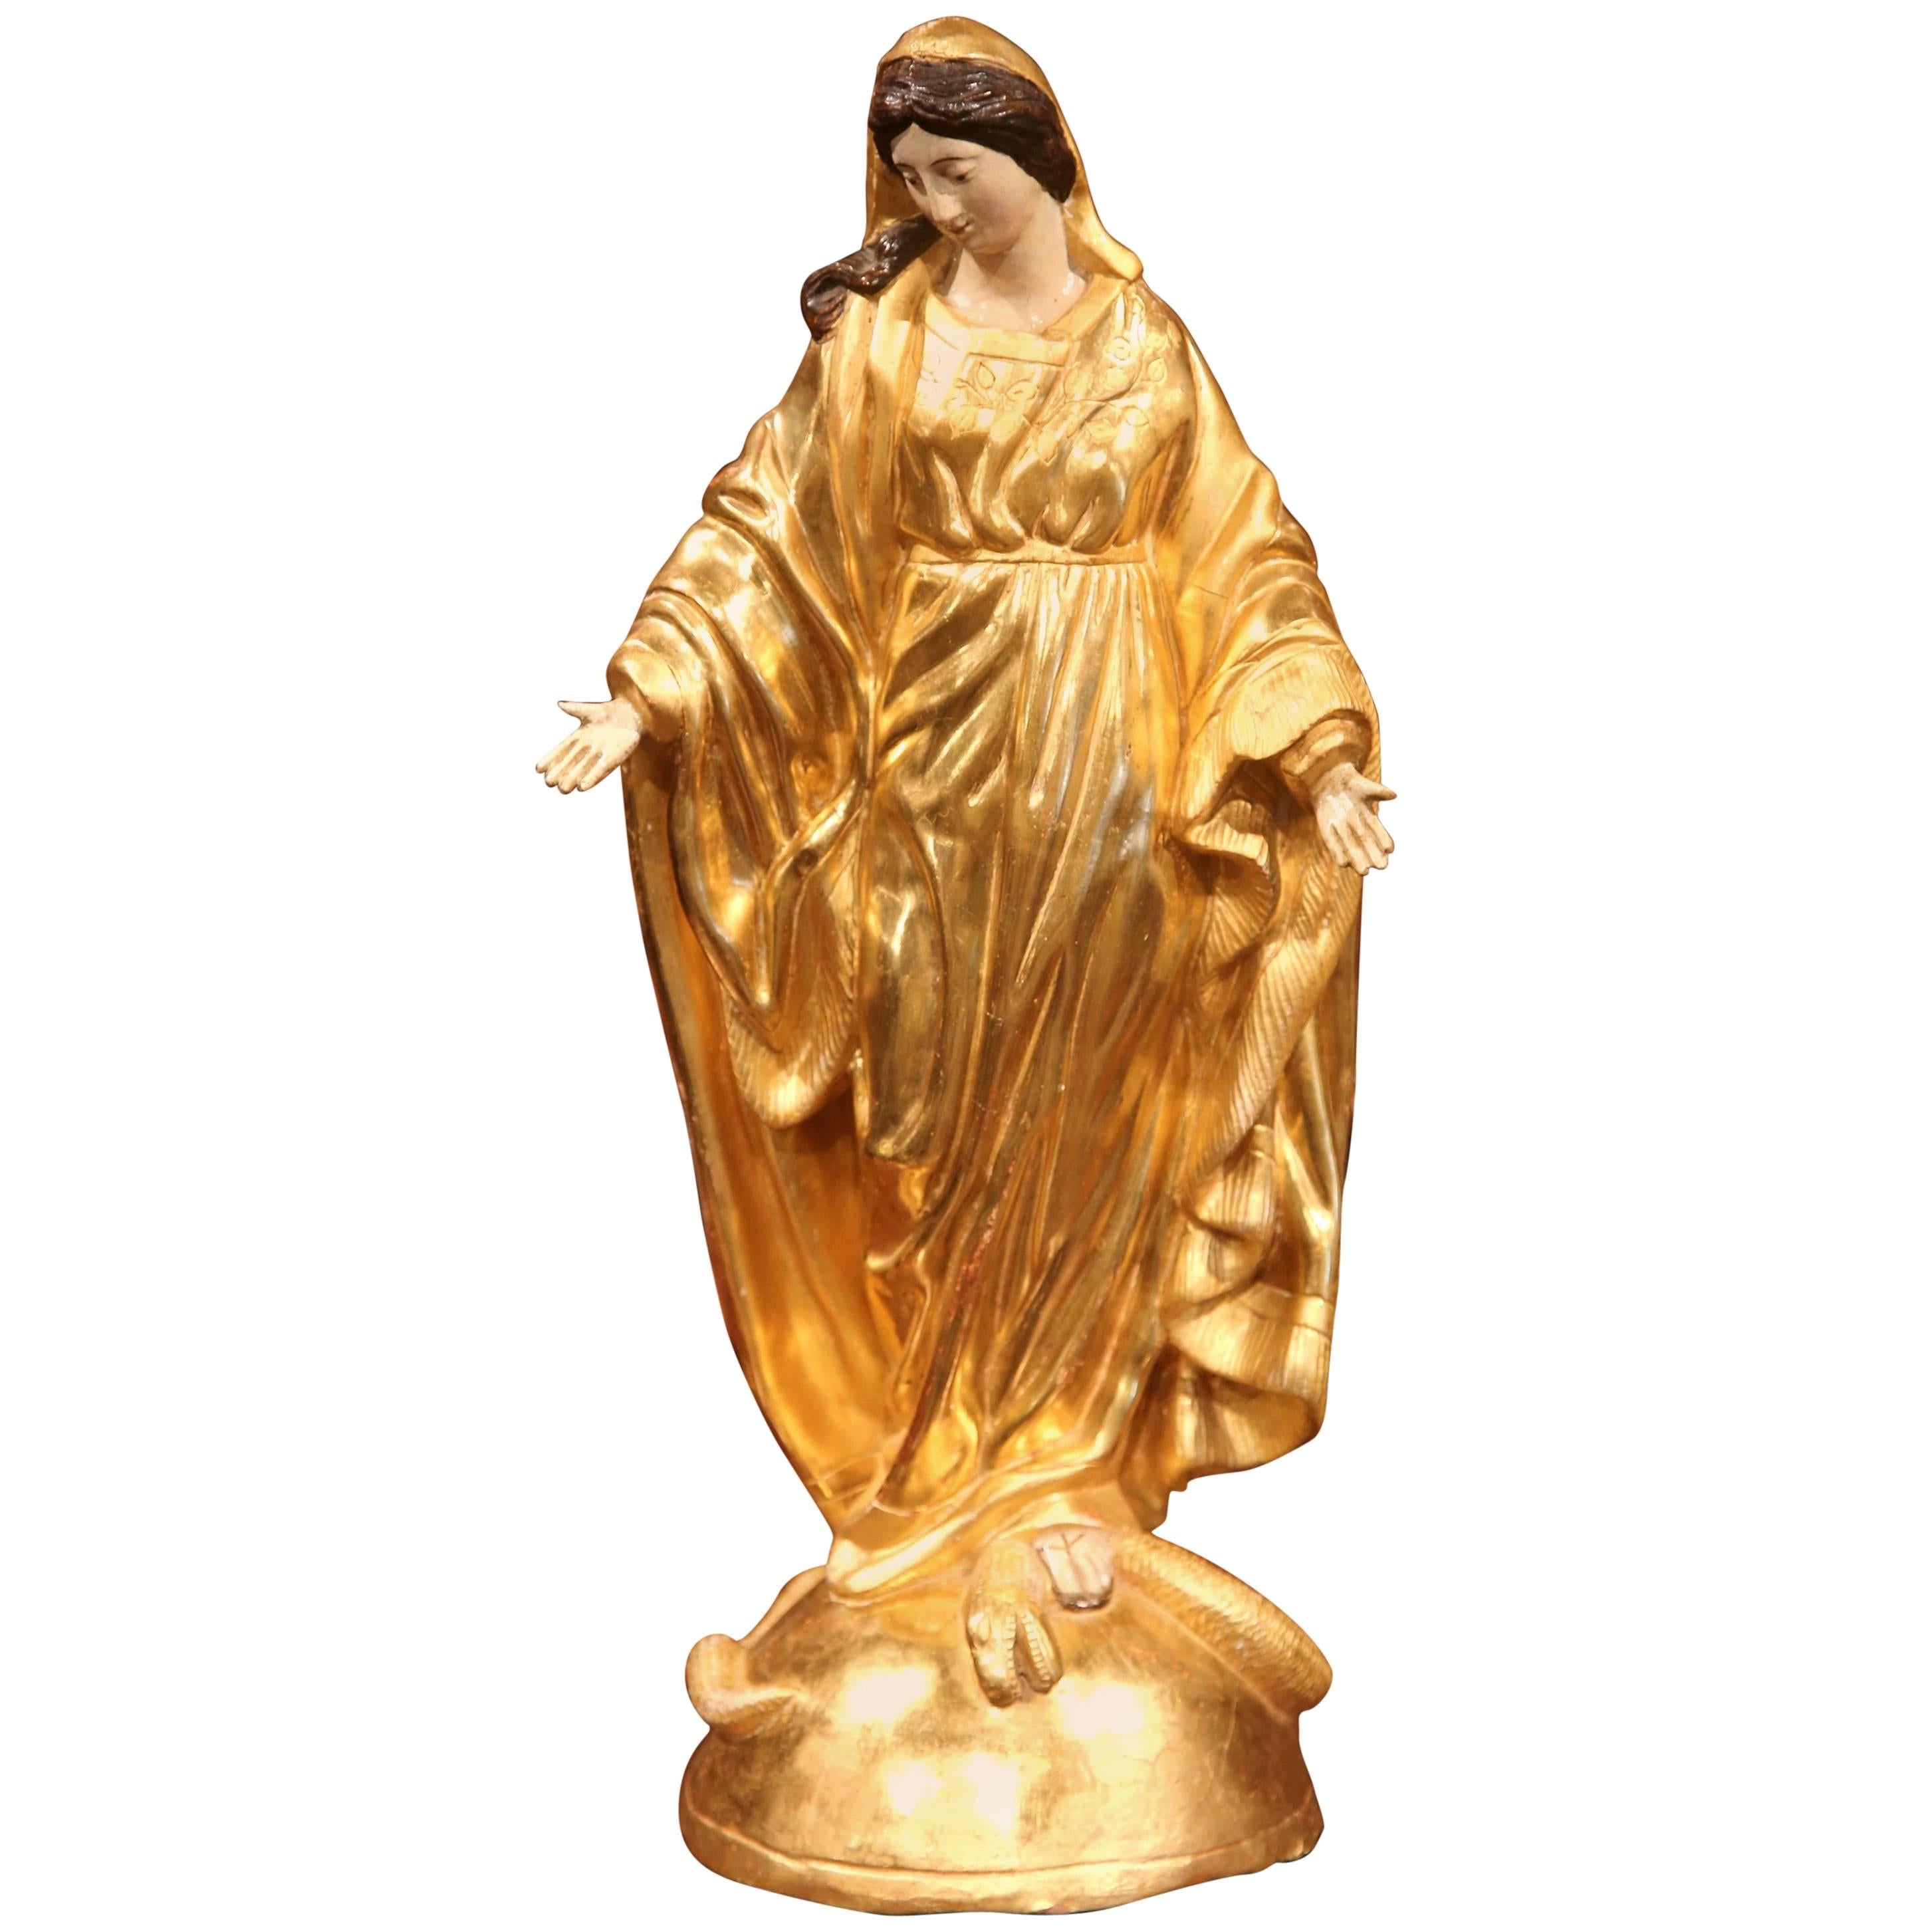 18th Century French Carved Giltwood Virgin Mary Statue Standing on Globe